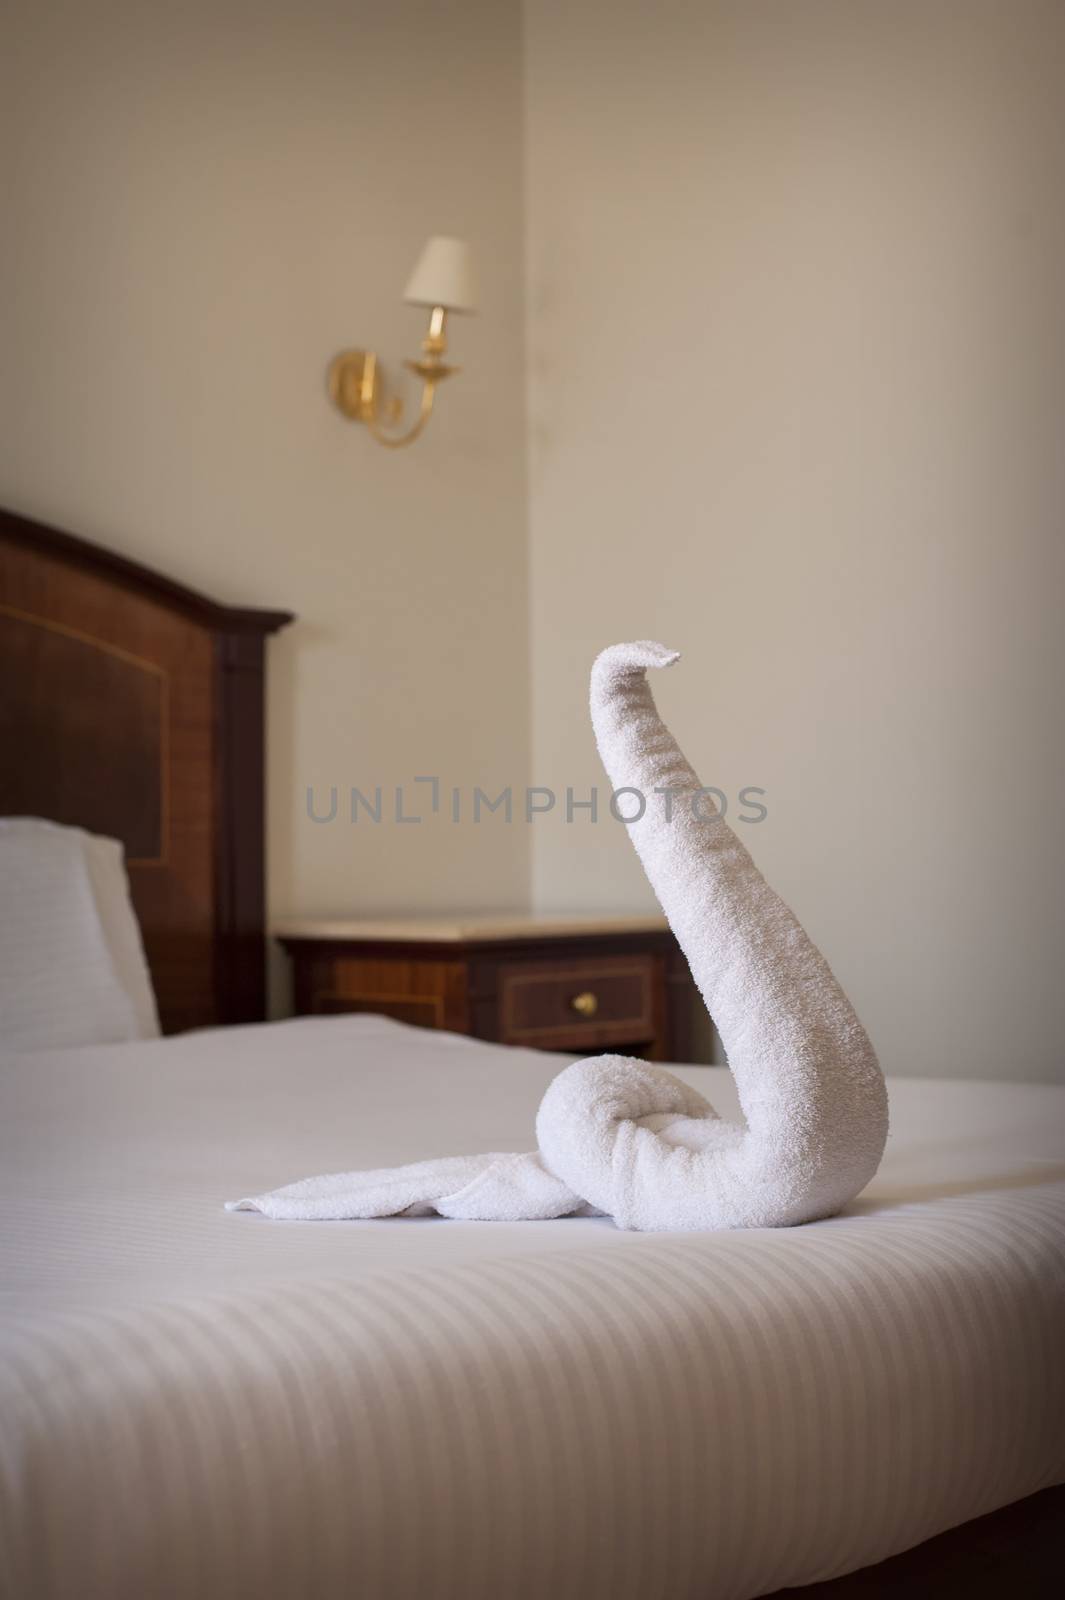 Luxurious Hotel bed close up towel